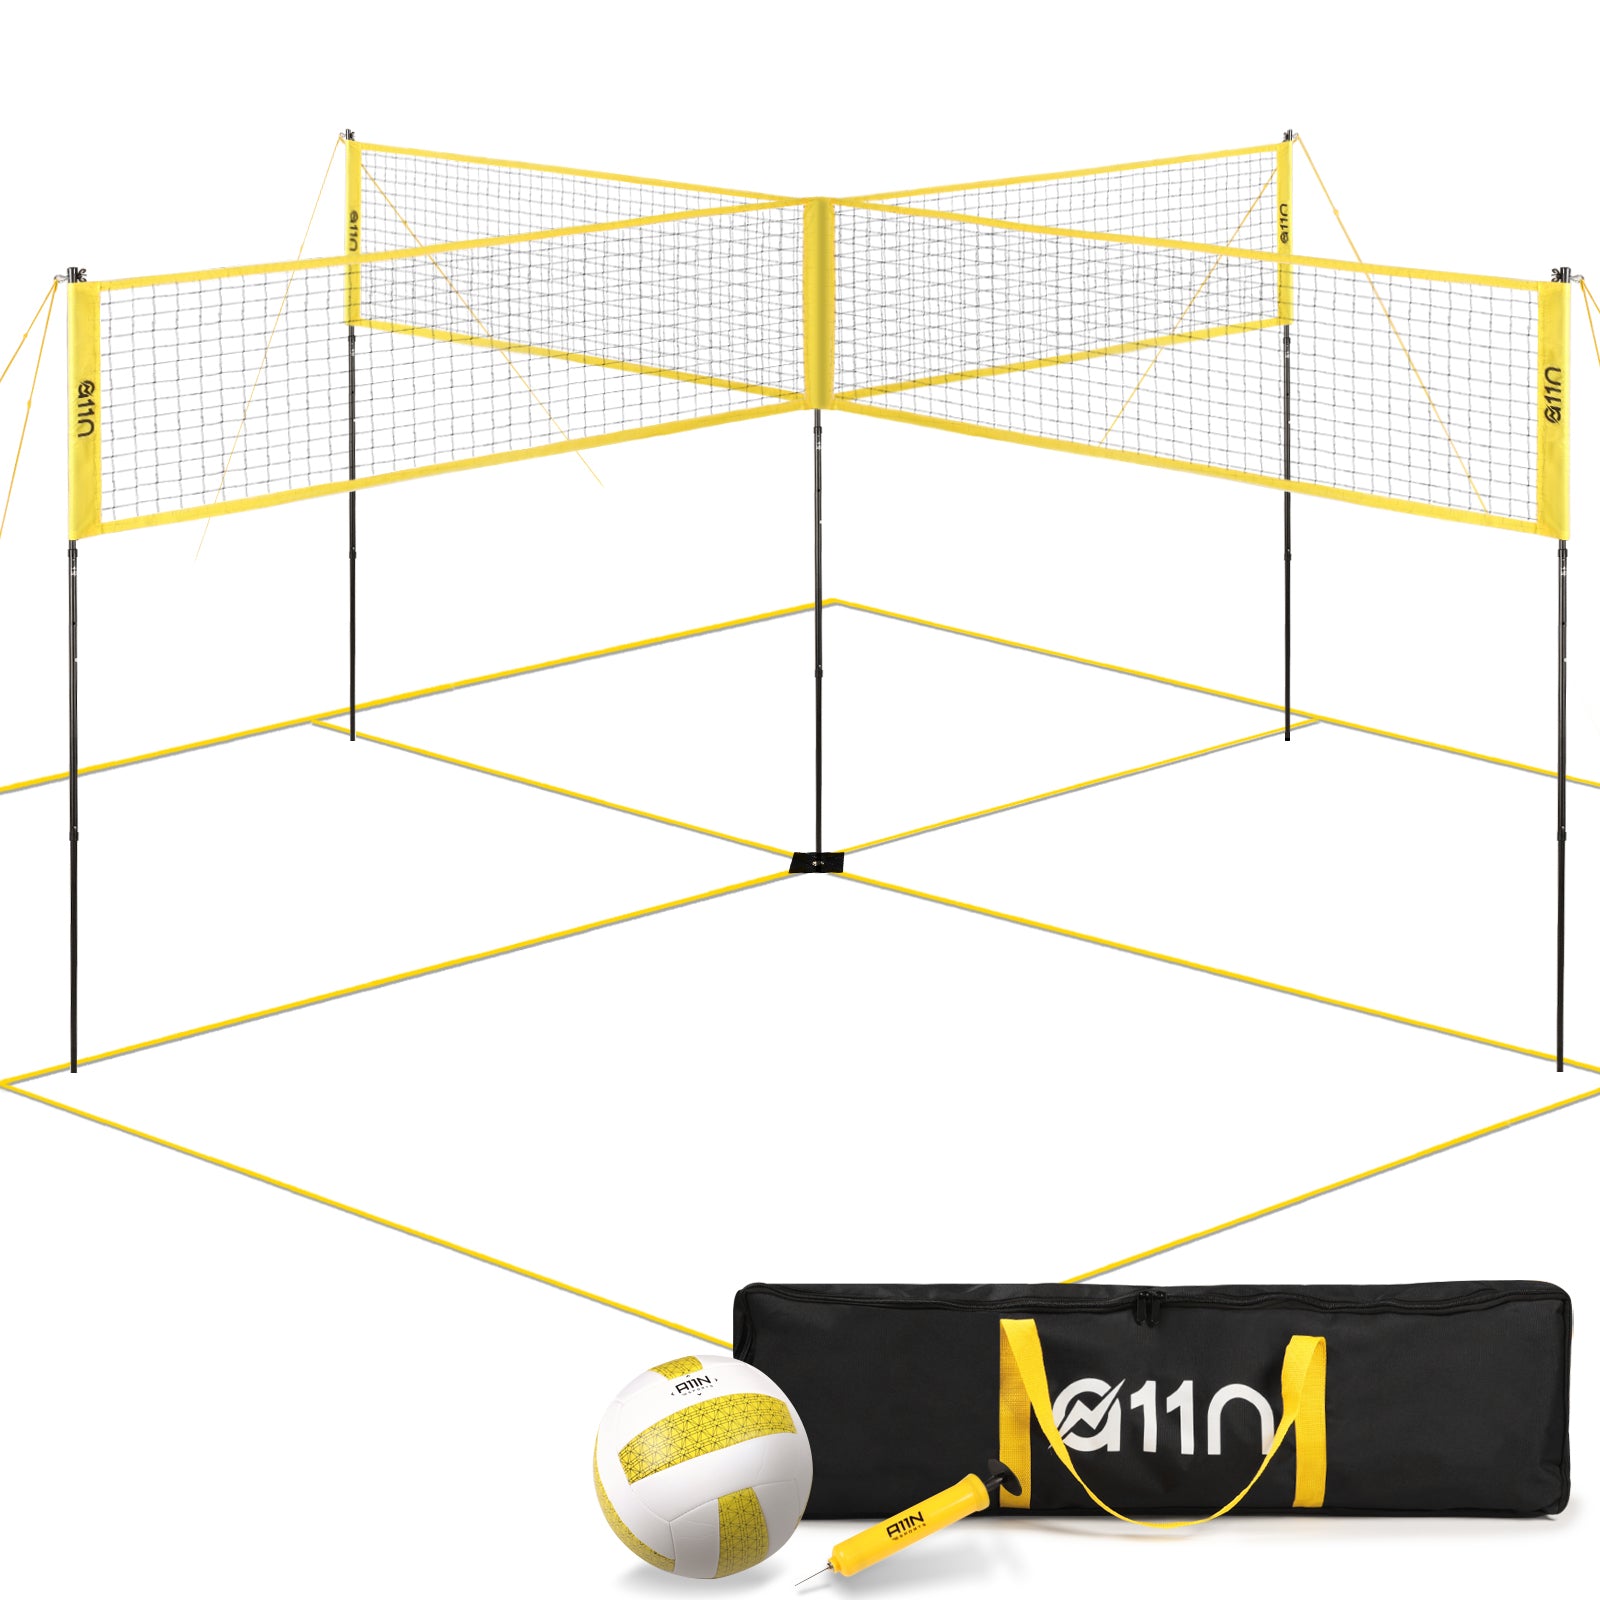 4-Way Volleyball and Badminton Net A11N SPORTS